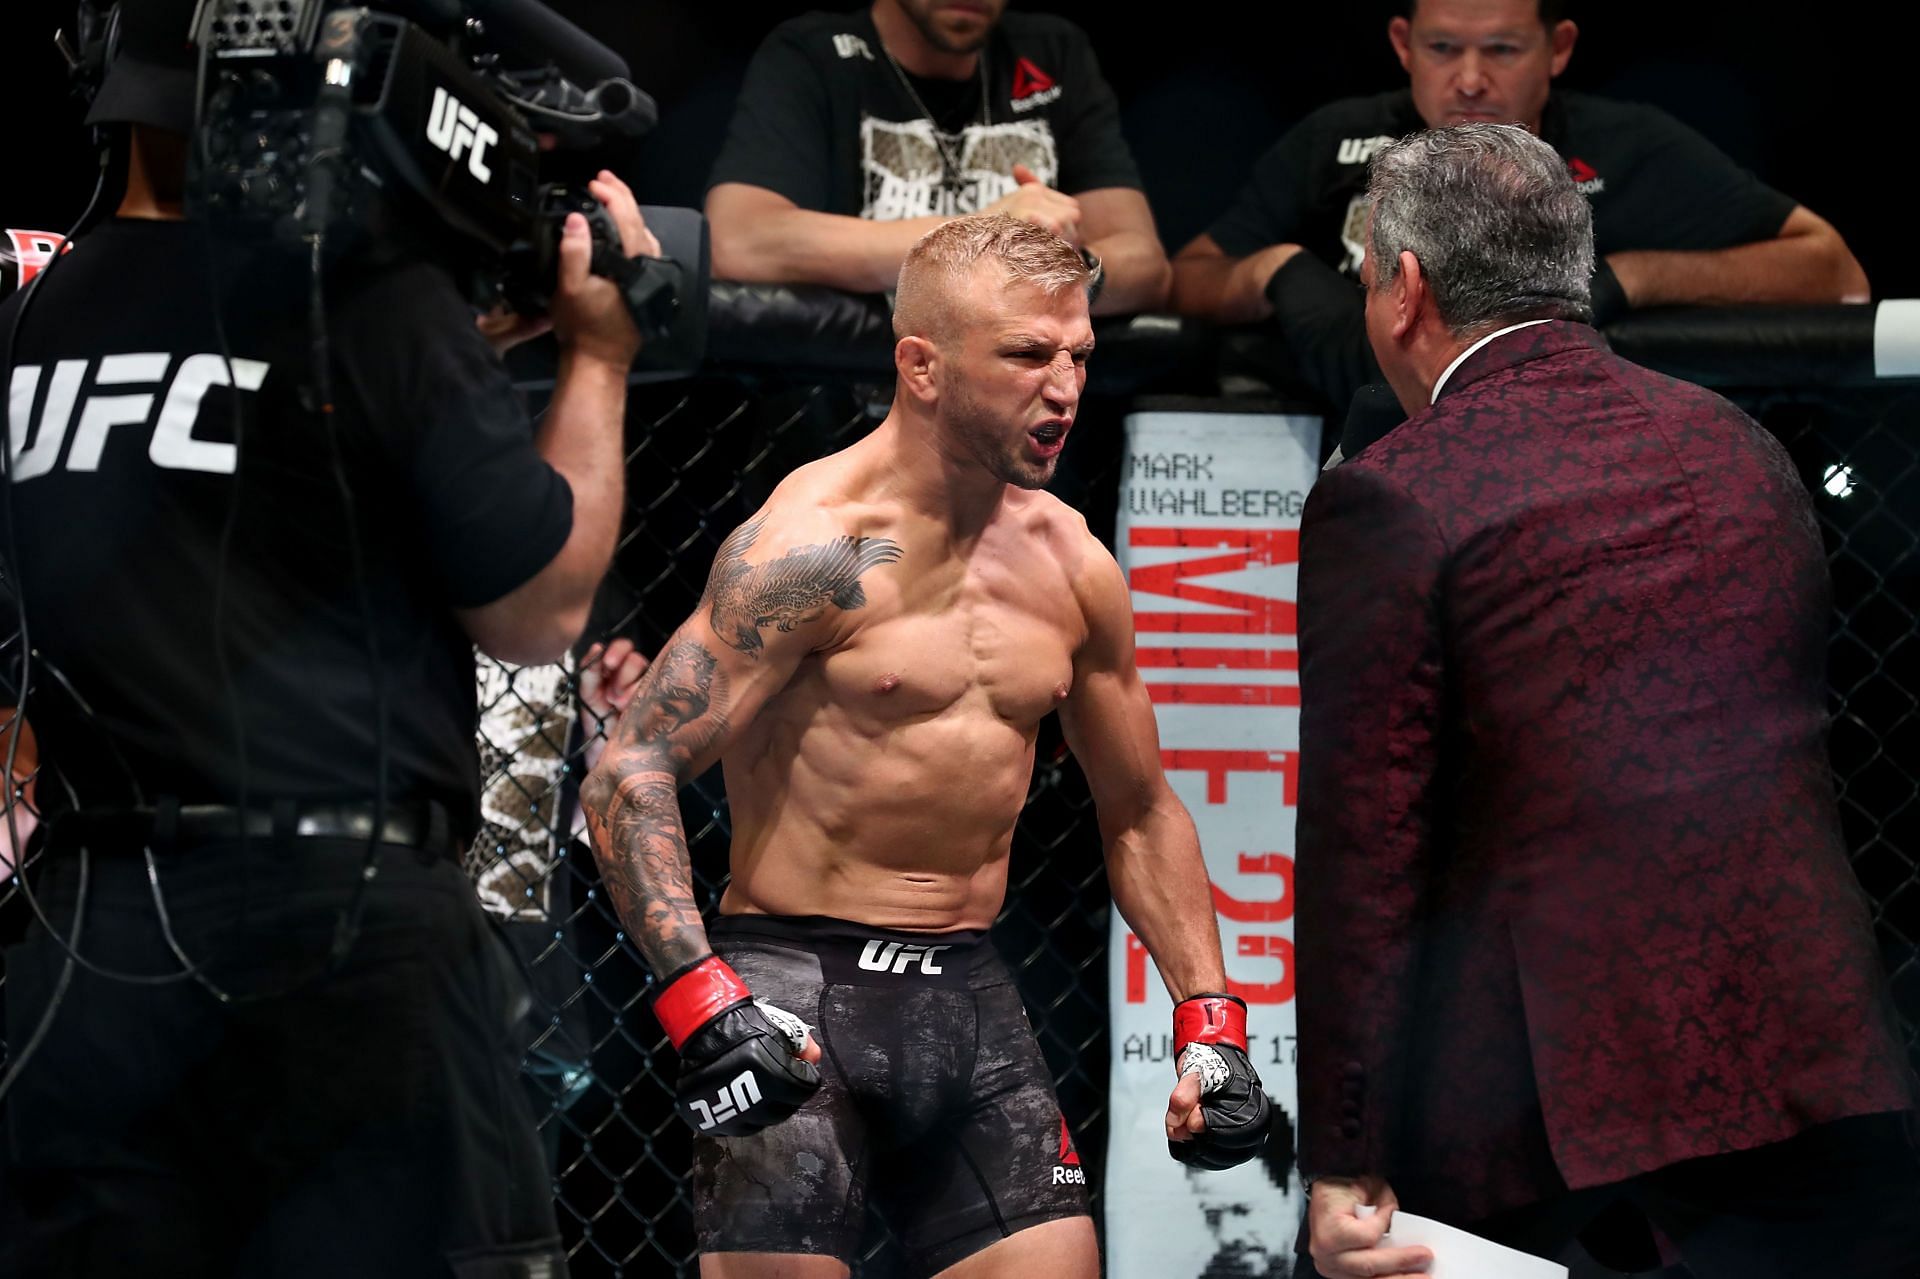 T.J. Dillashaw holds a record of 17-4